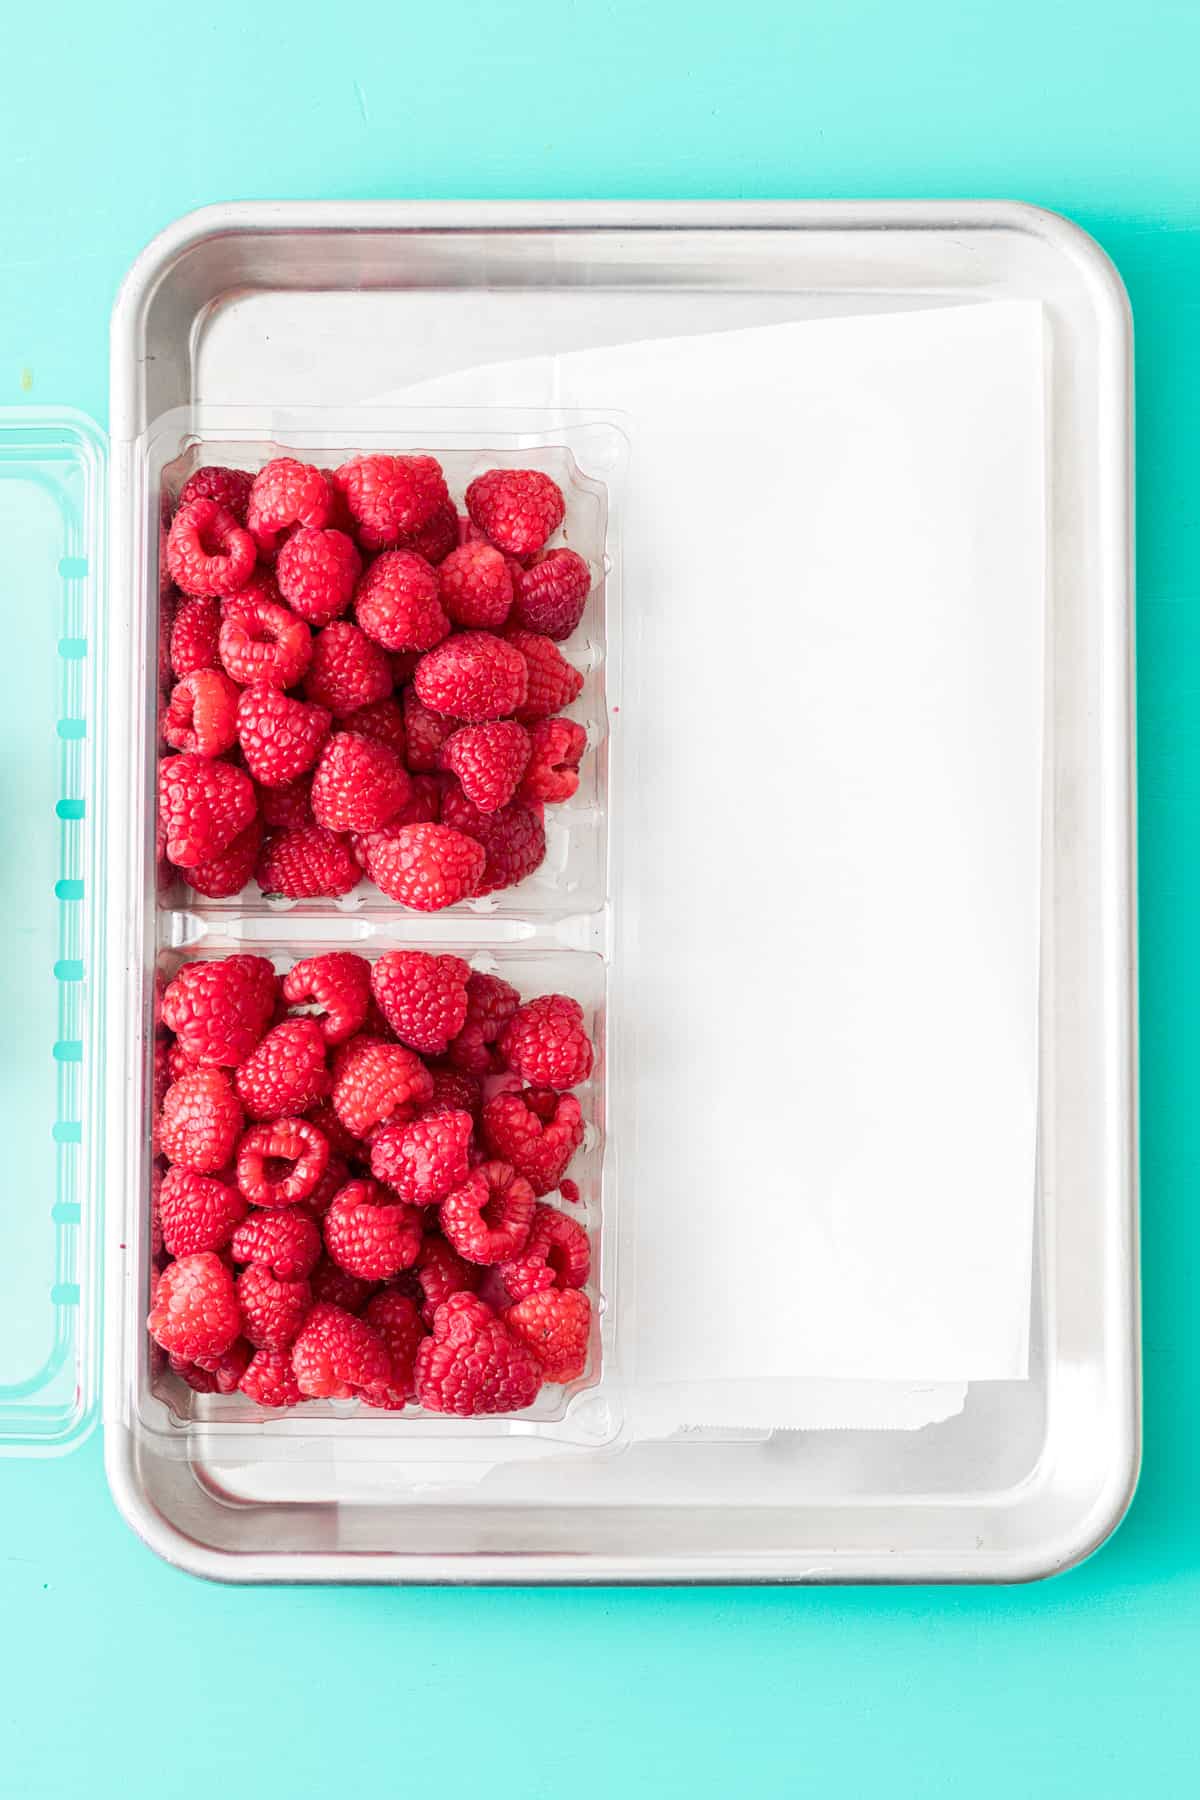 Berries, parchment paper, and baking sheet.